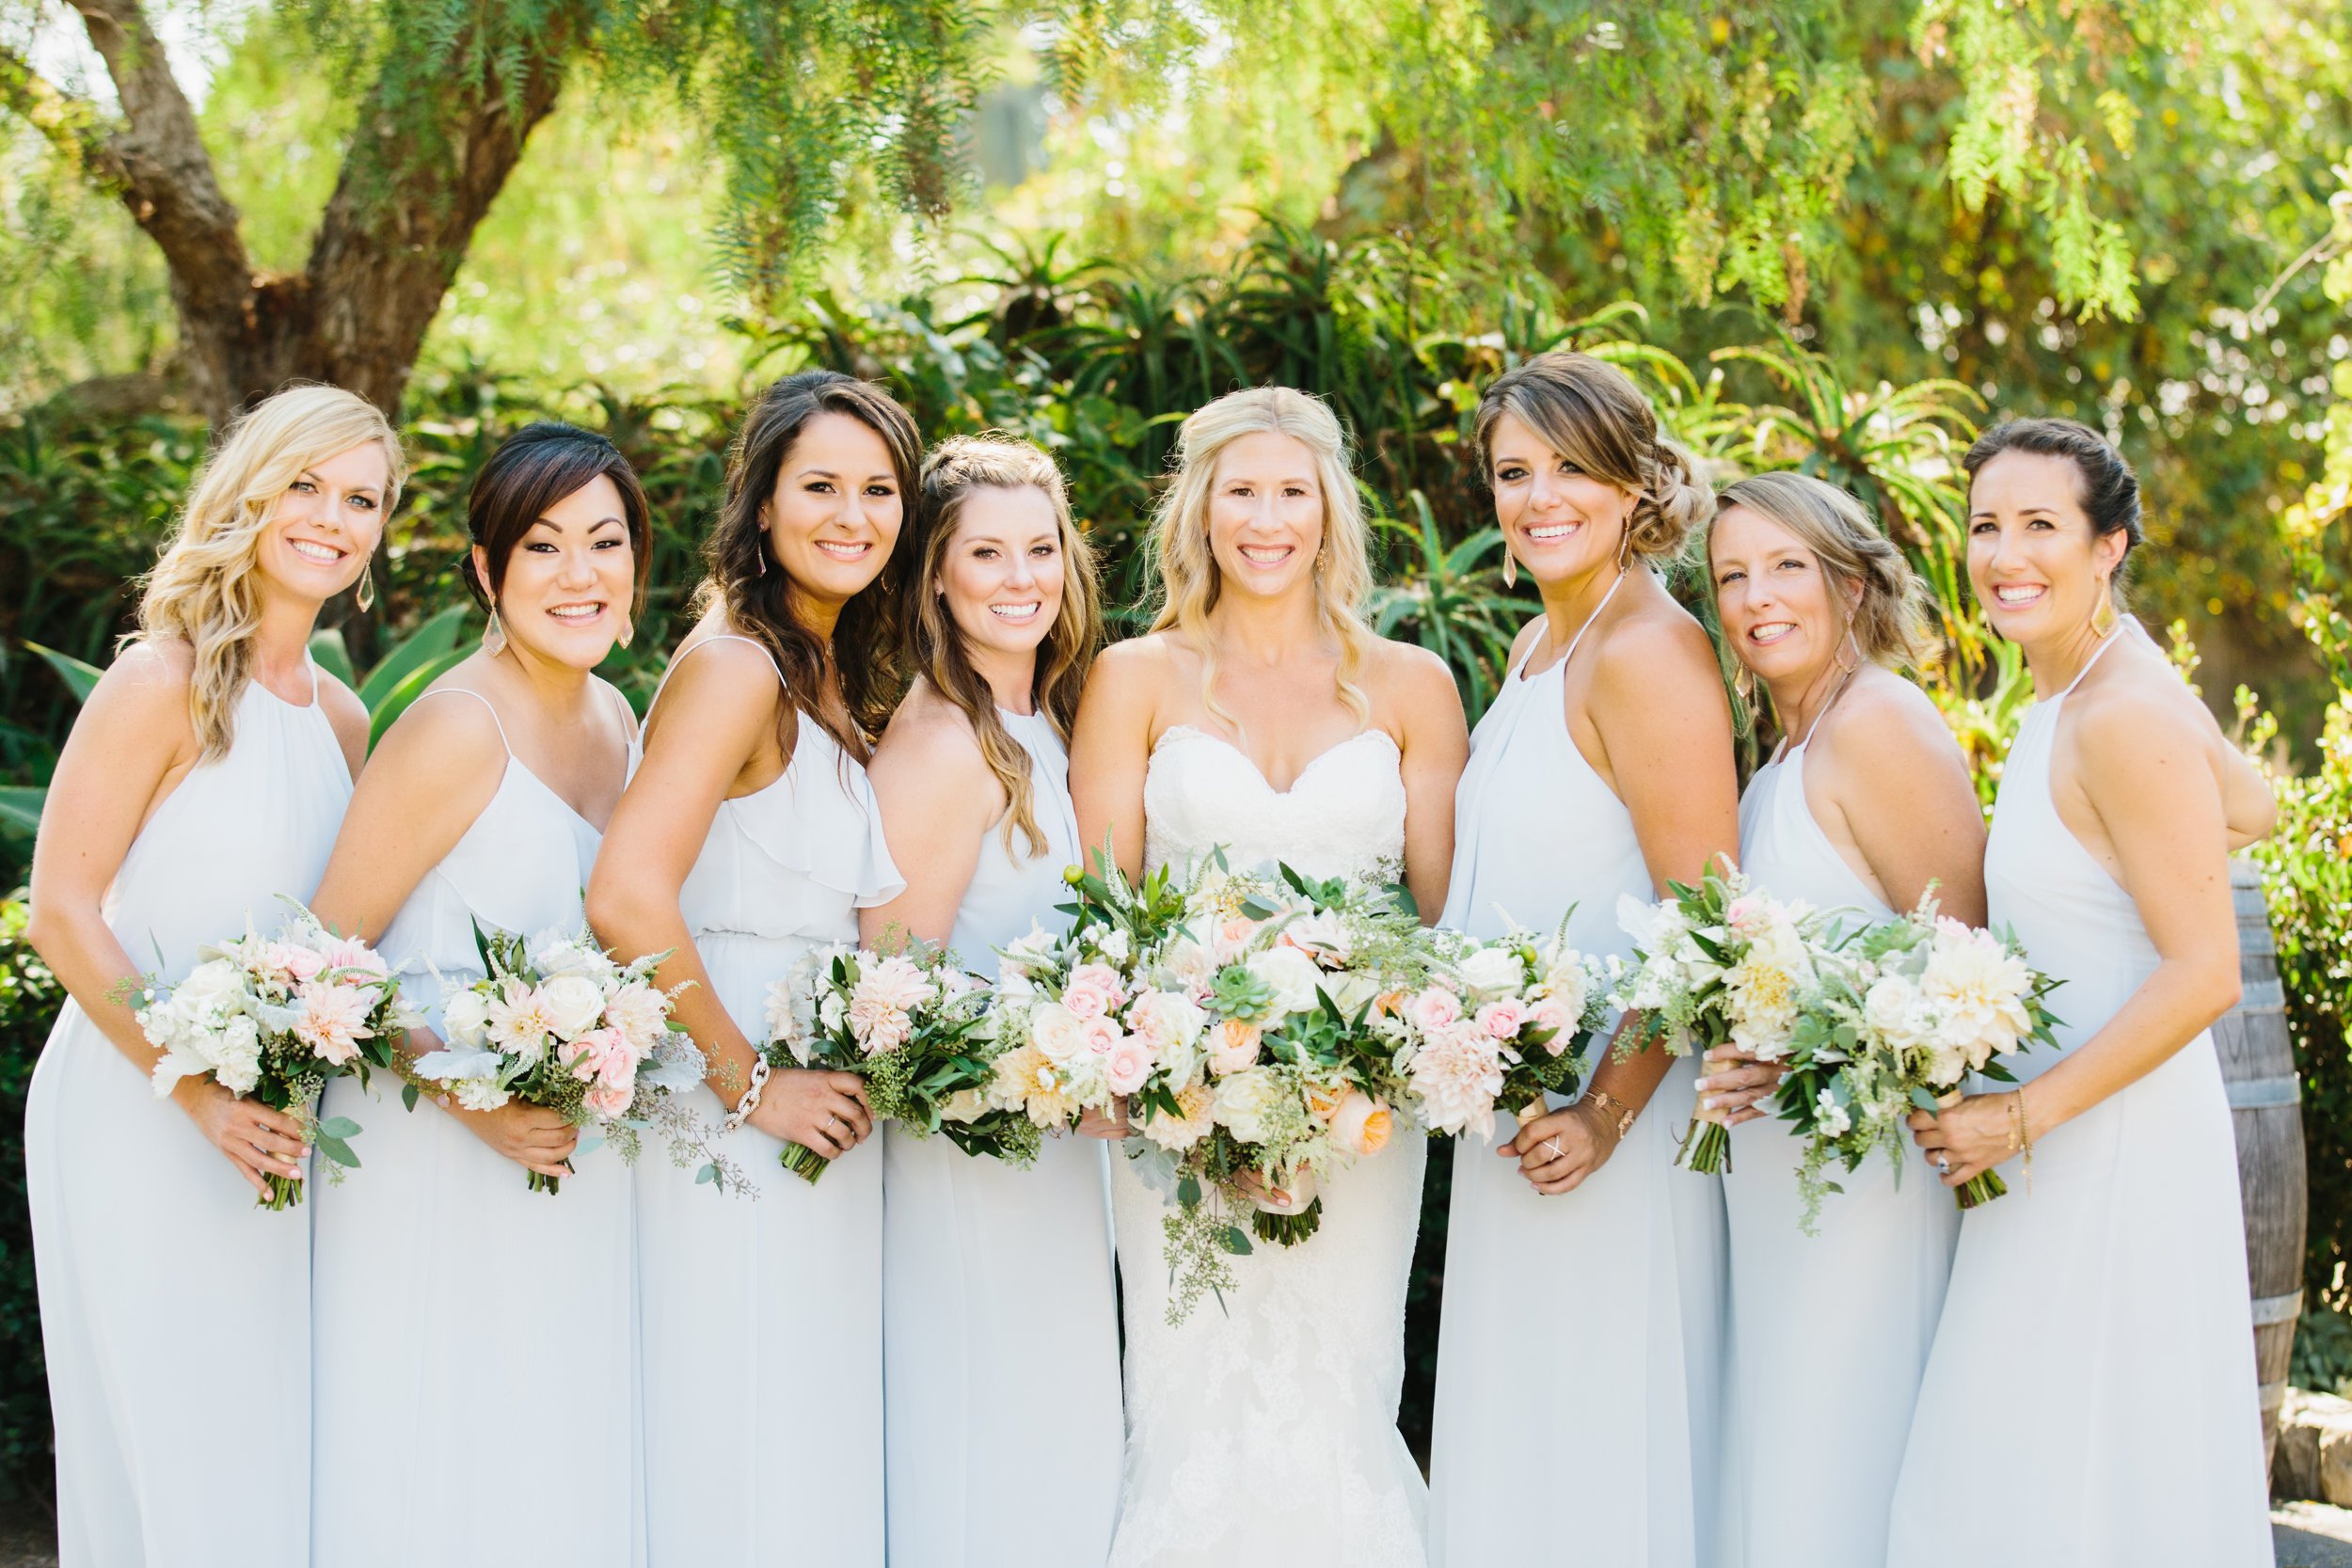 www.santabarbarawedding.com | The Sanadas | Santa Barbara Historical Museum | Joelle Charming | These Buds A Blooming | Bride and Her Bridesmaids